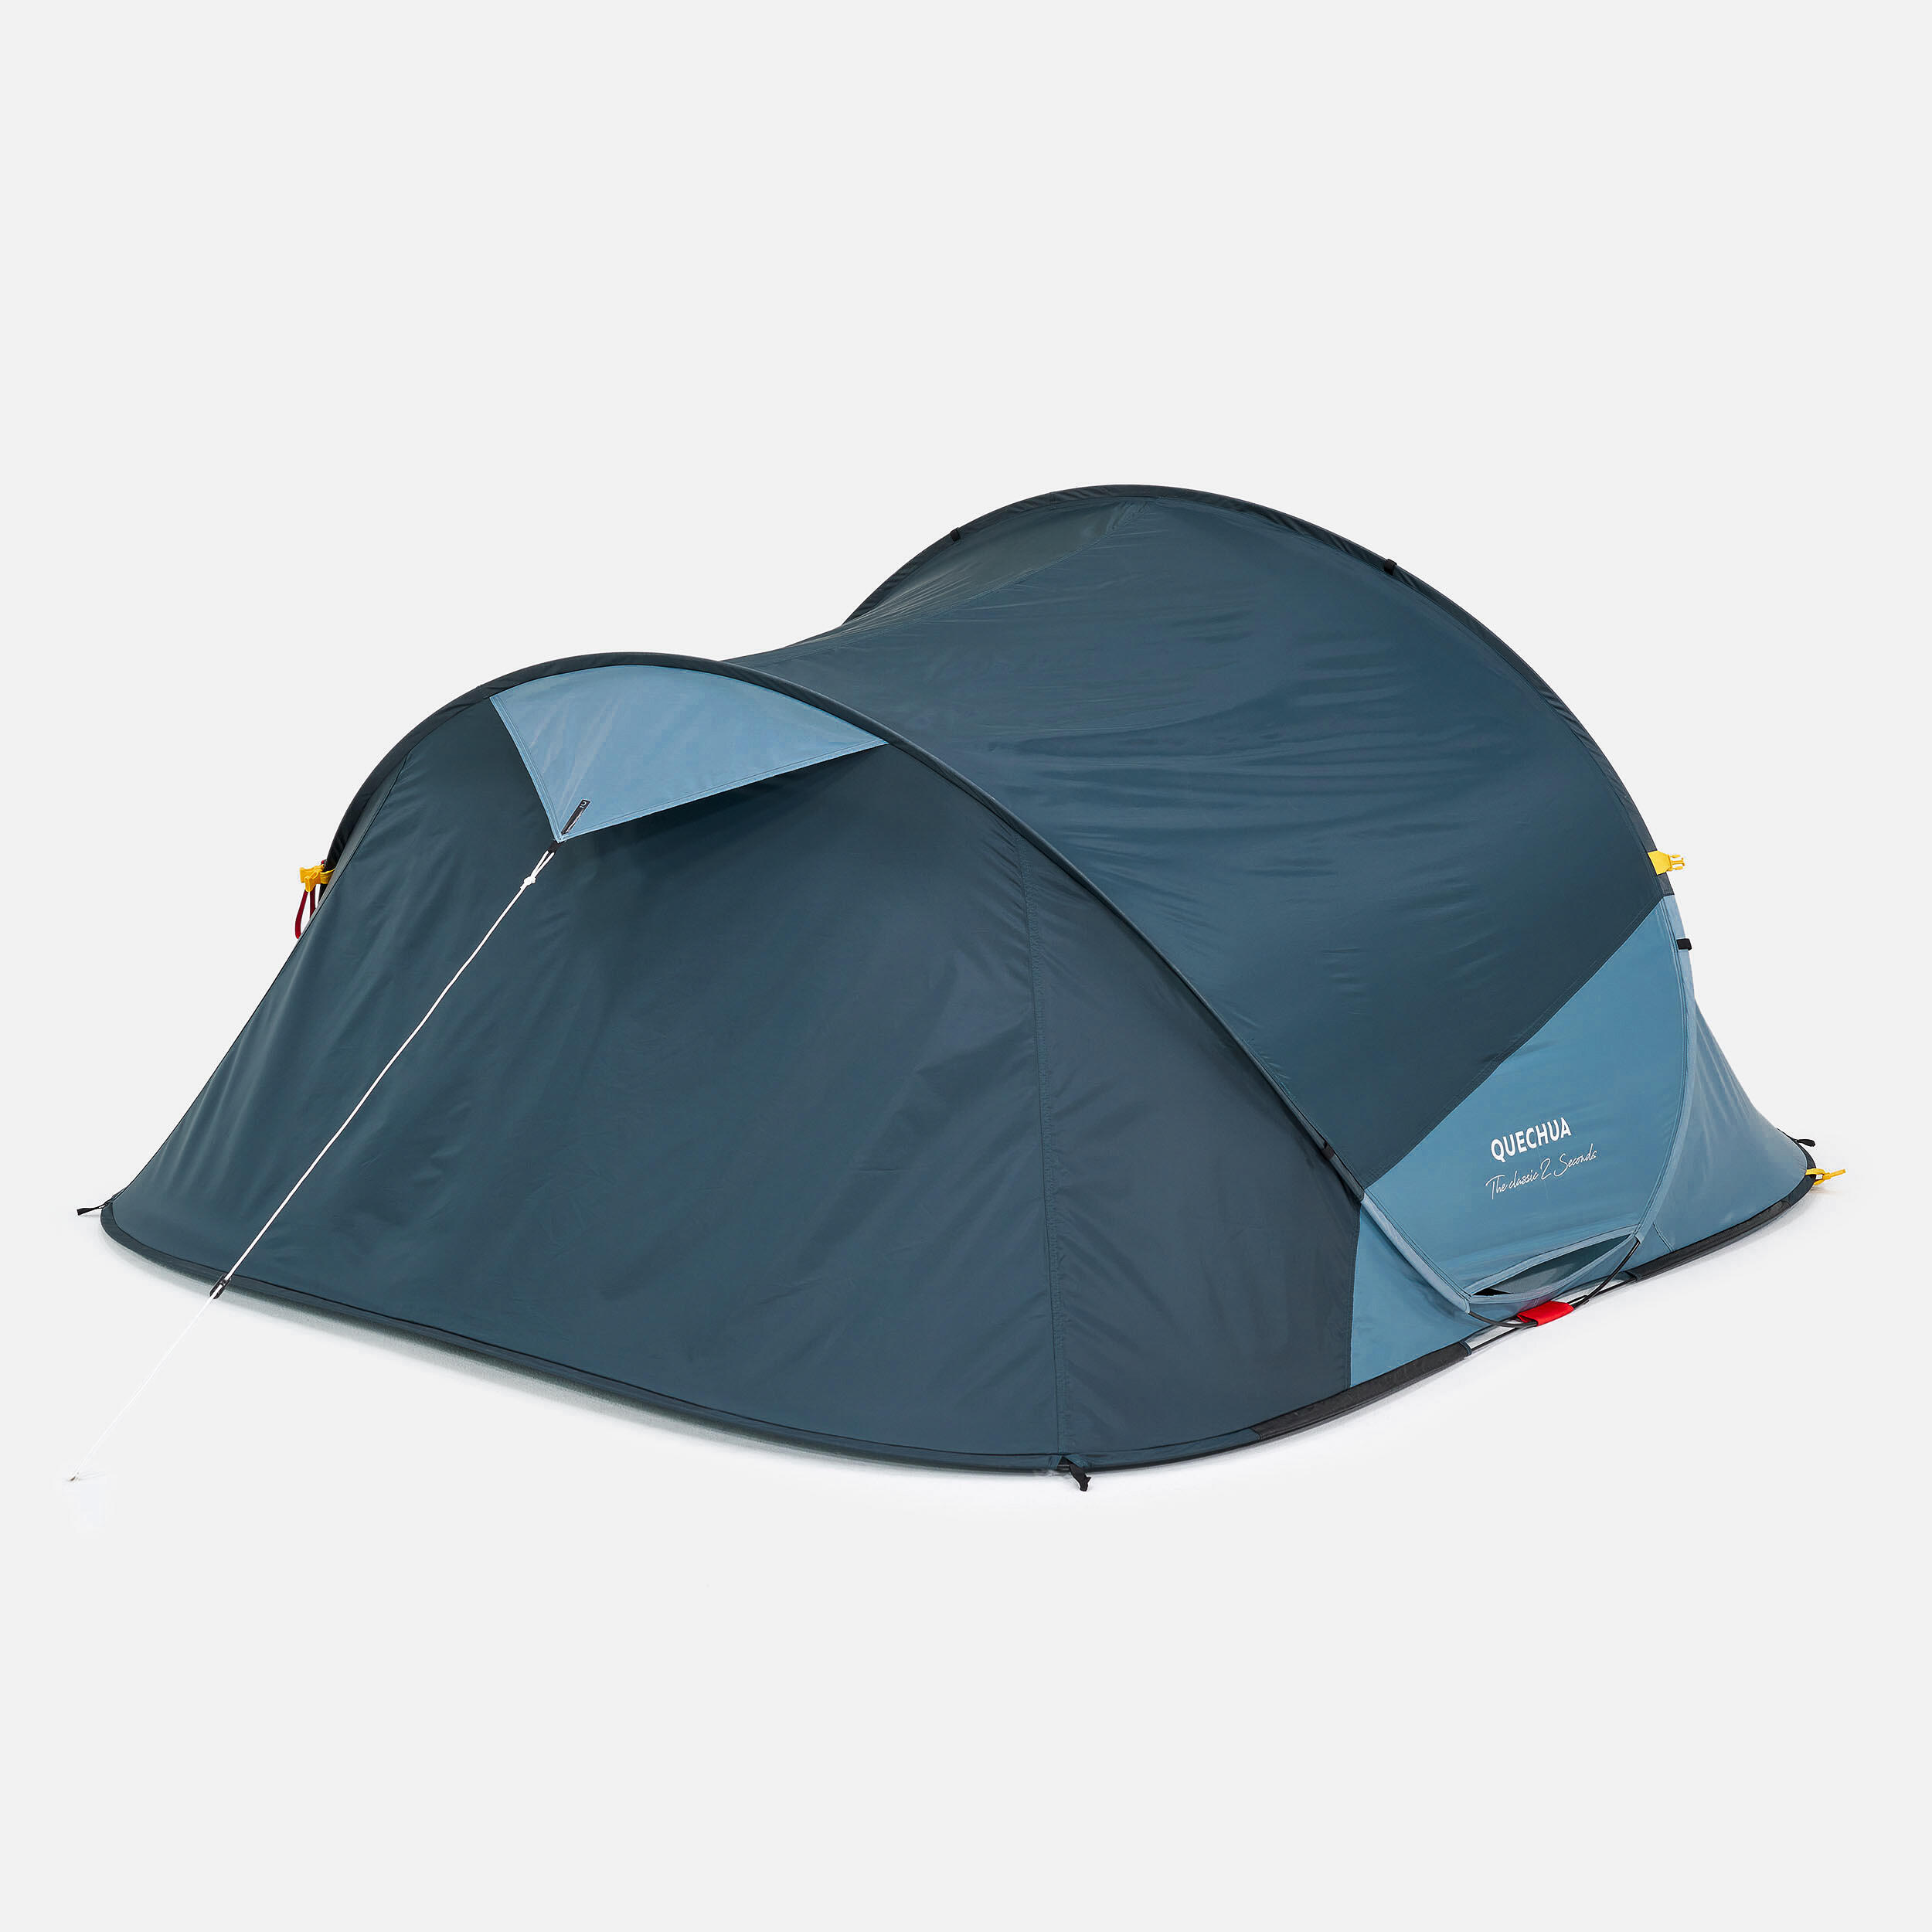 Camping tent - 2 SECONDS - 3-person 9/13